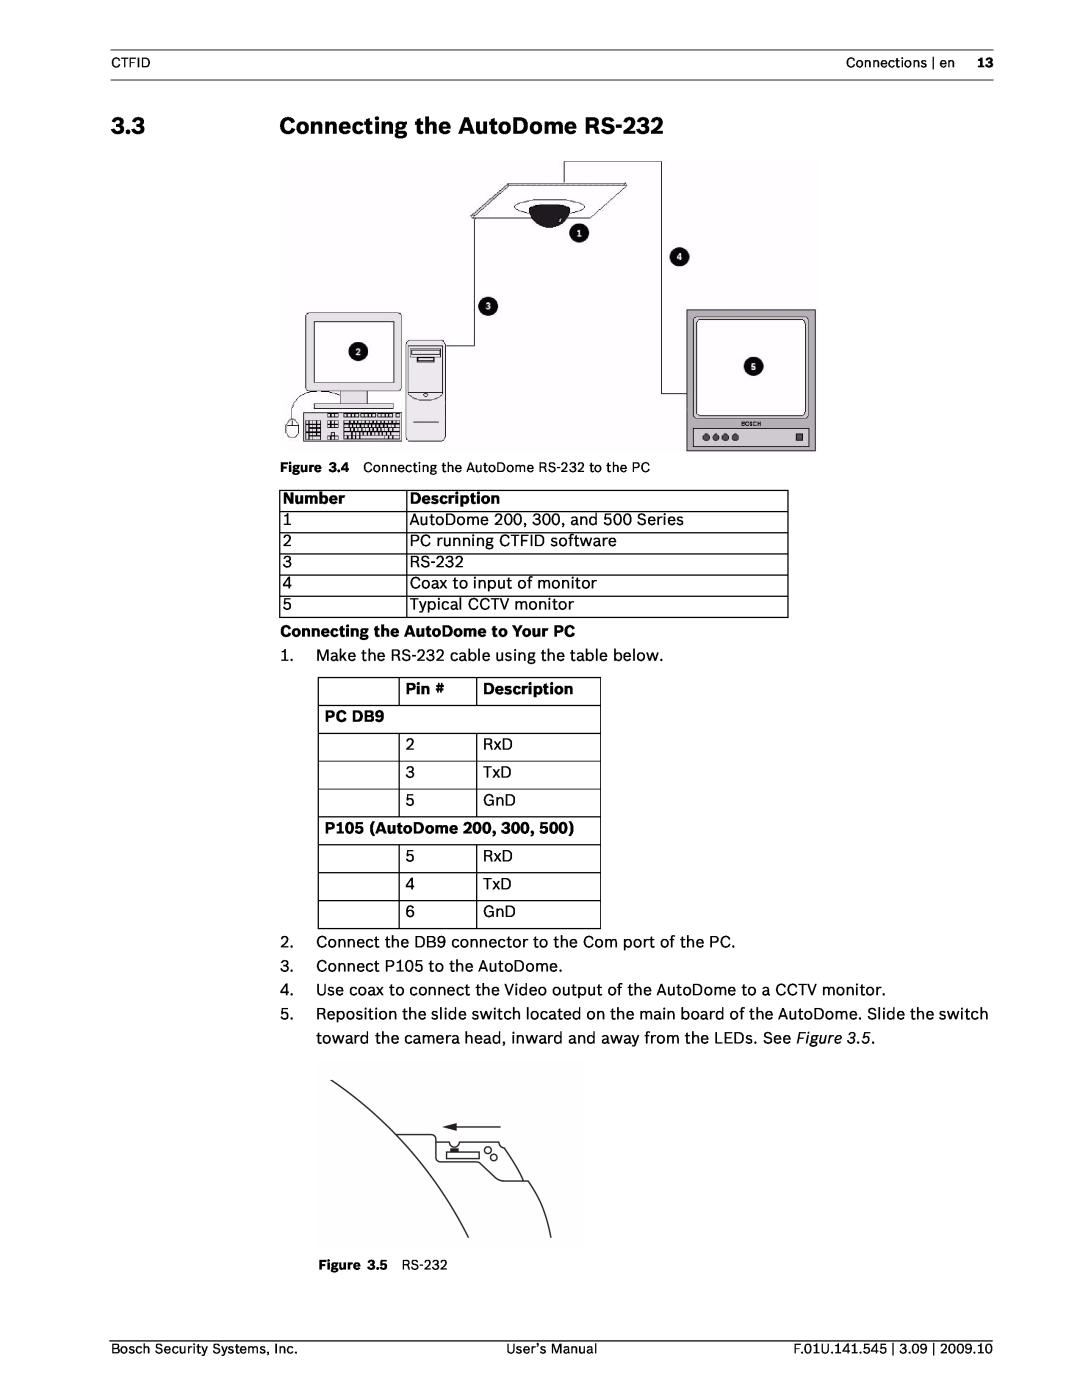 Bosch Appliances VP-CFGSFT Connecting the AutoDome RS-232, Number, Description, Connecting the AutoDome to Your PC, Pin # 